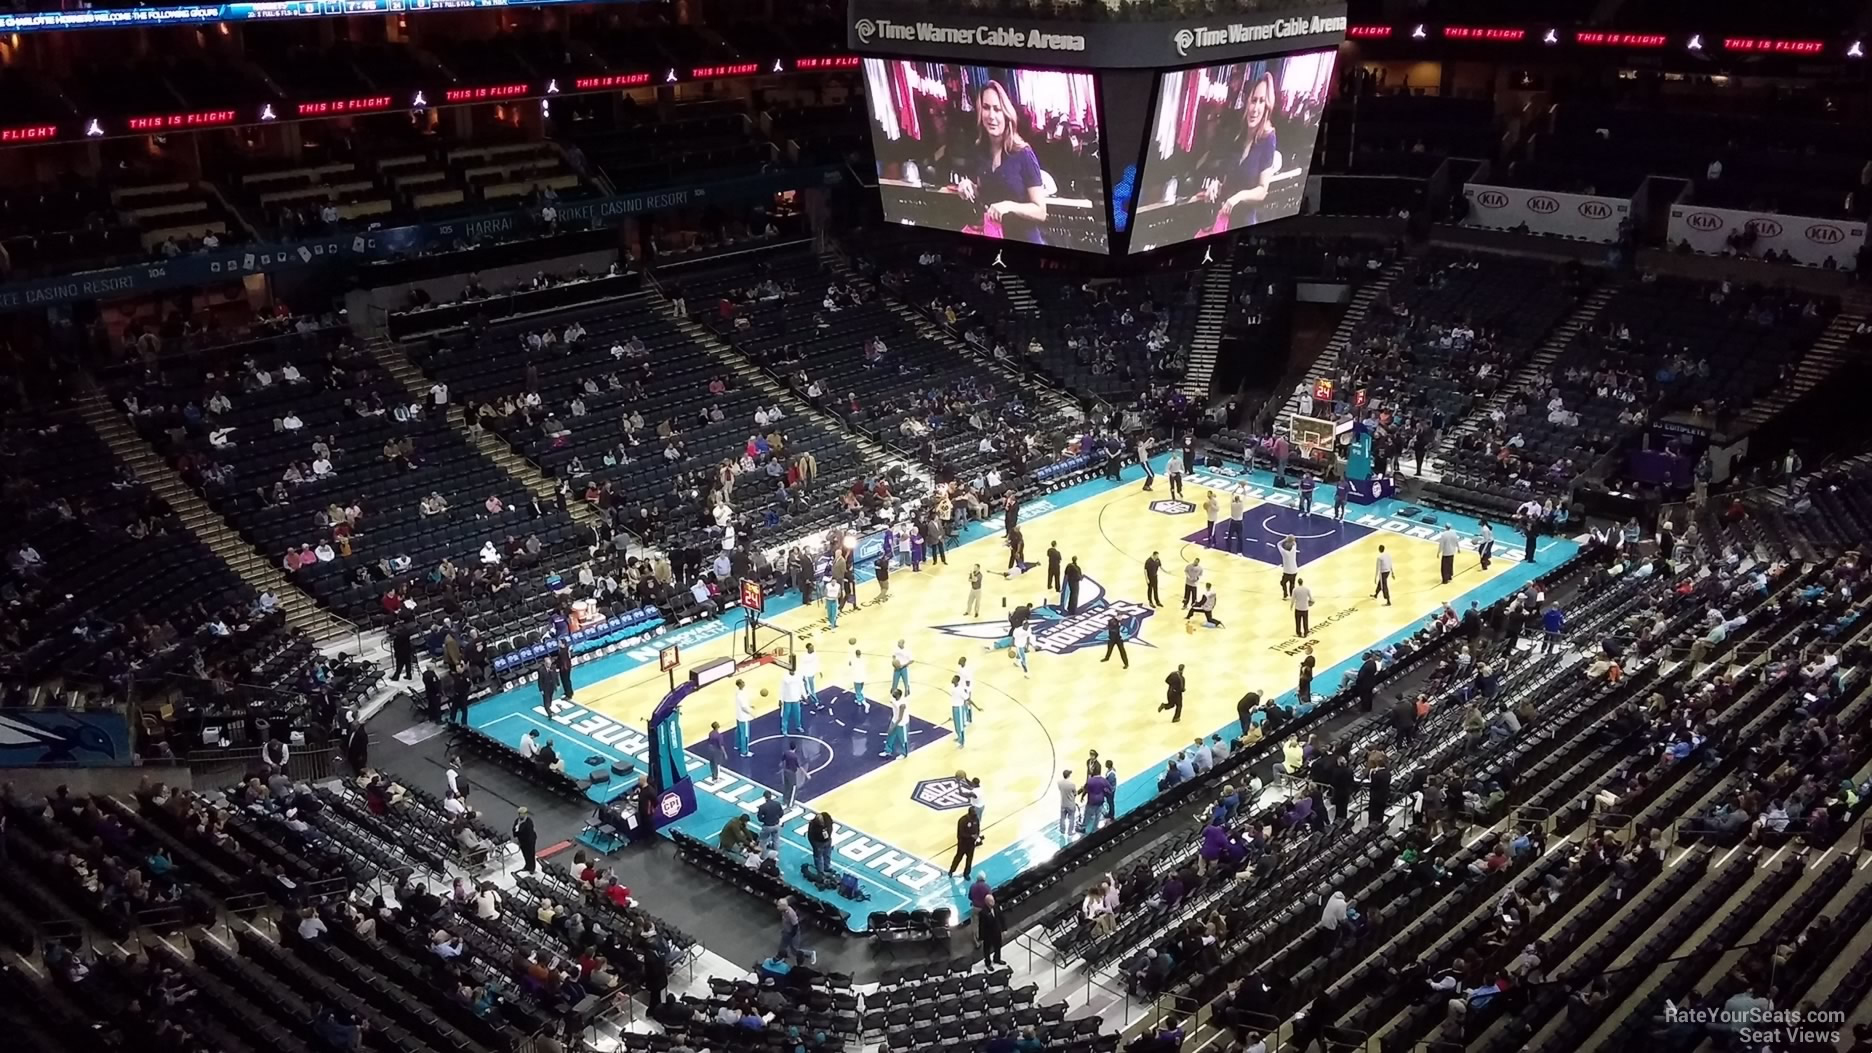 Section 230 at Spectrum Center